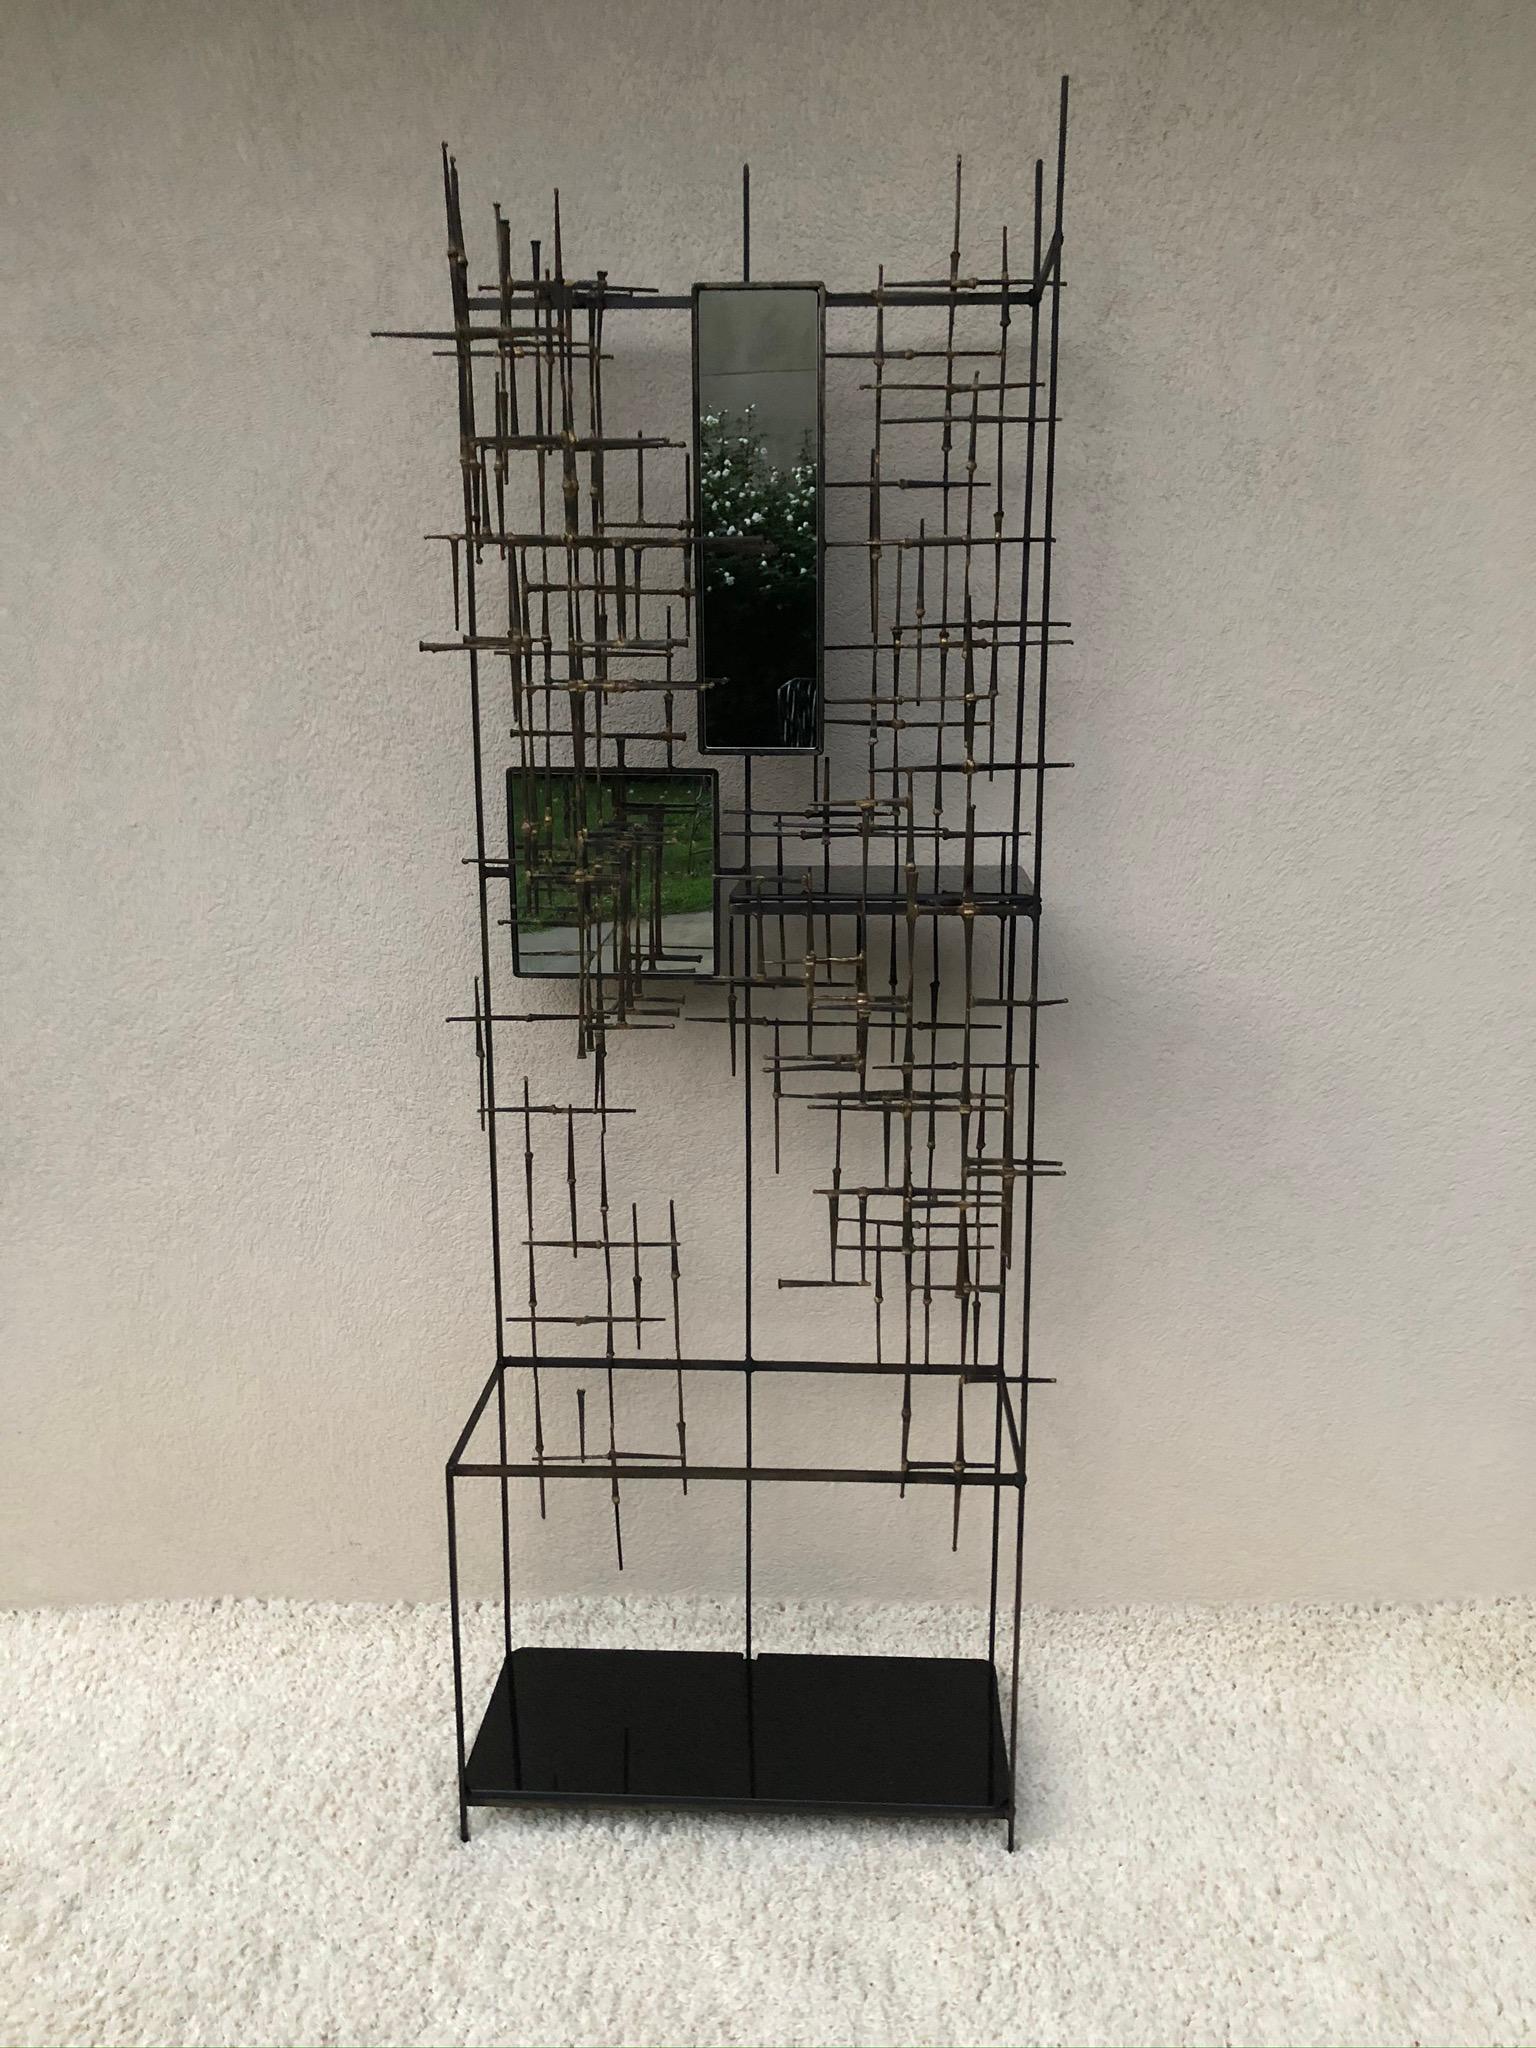 Tall modernist black iron and bronze soldered entrance umbrella stand, display piece, one of a kind sculpture,
Mirrored sections and black glass shelves, unique piece to accent a hallway or entrance.
  